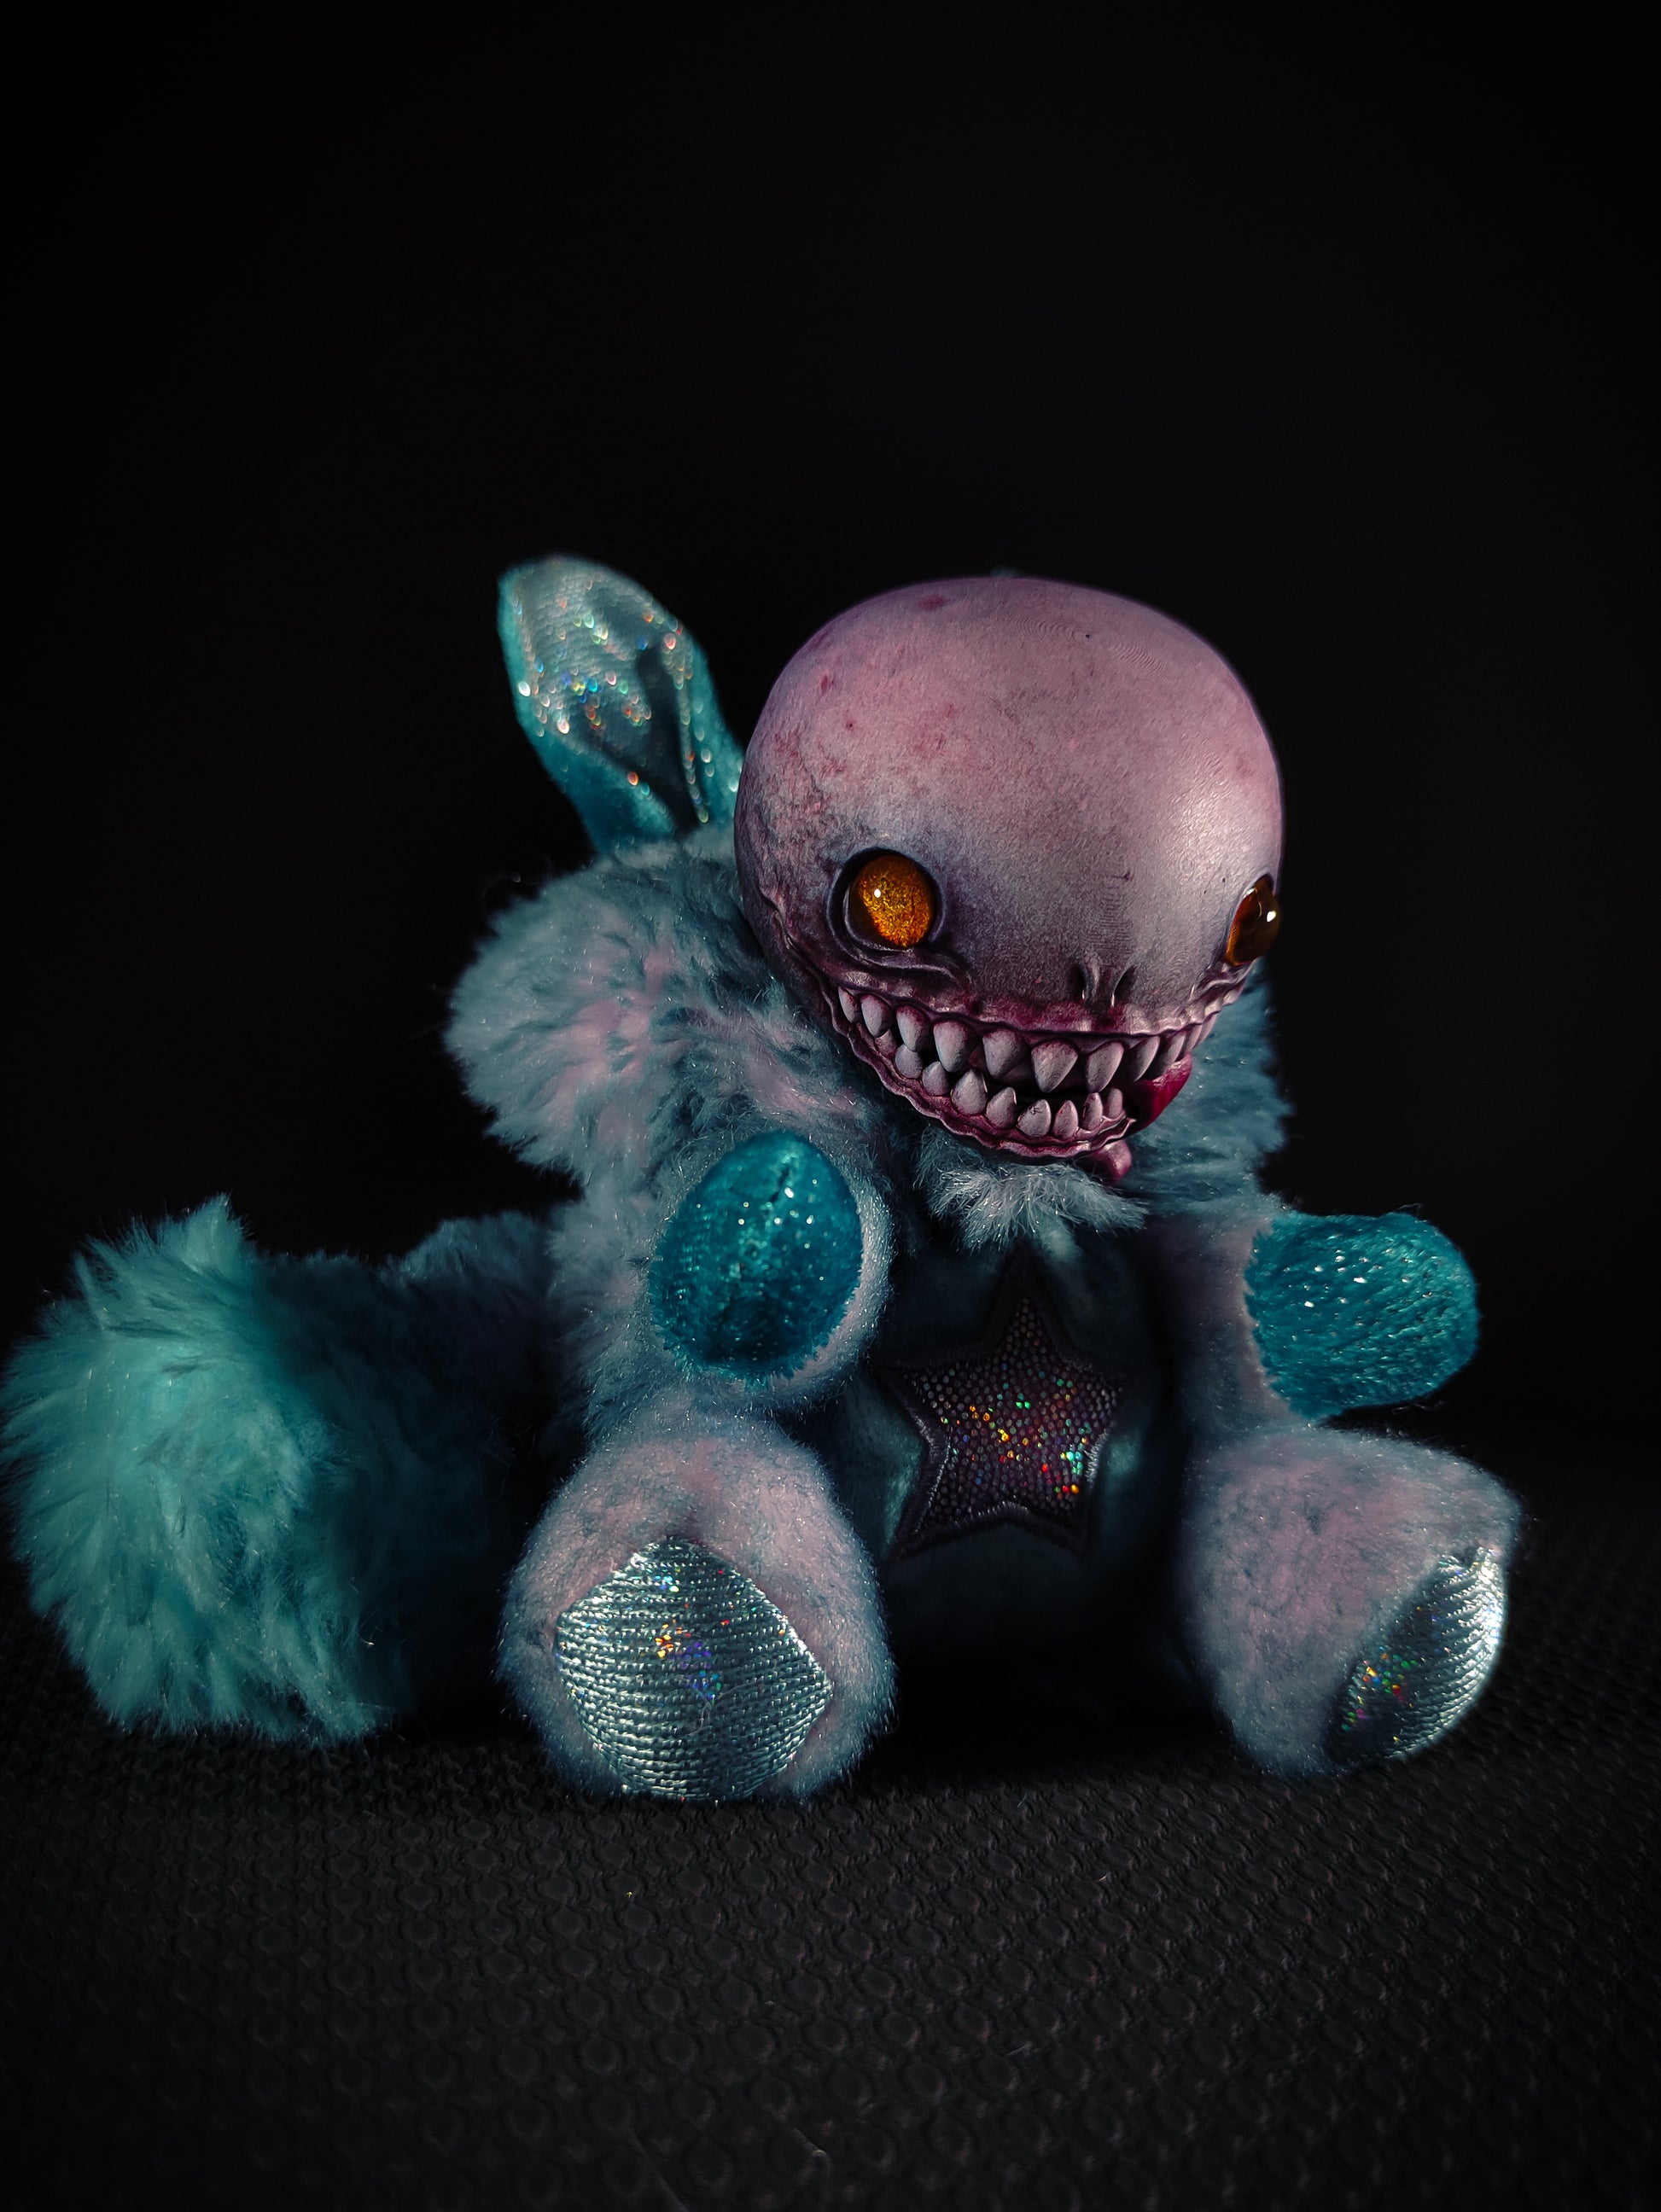 Bloold - FRIEND Cryptid Art Doll Plush Toy